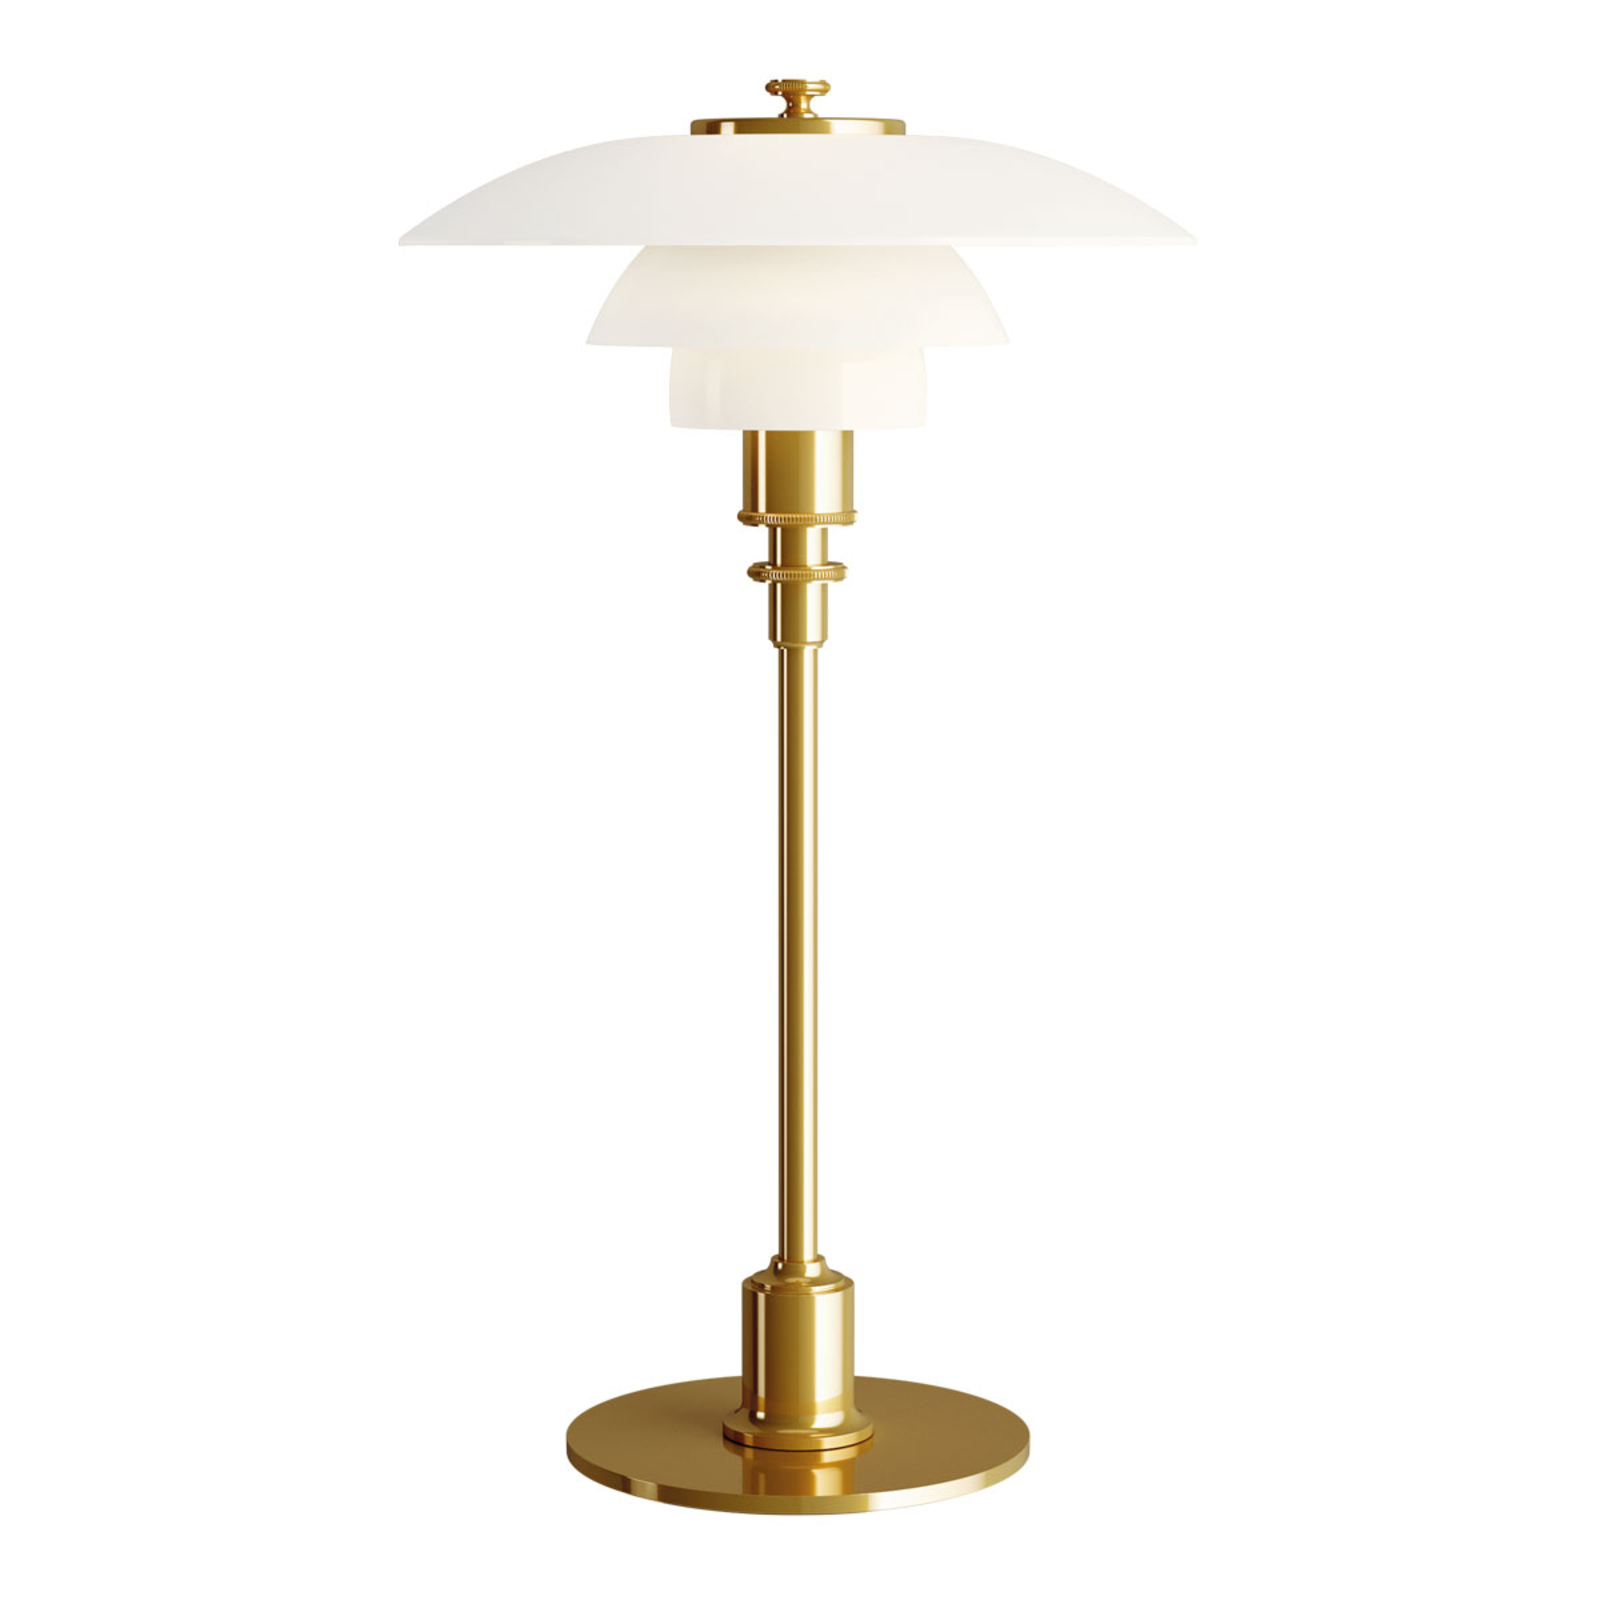 Louis Poulsen PH 2/1 table lamp brass and white